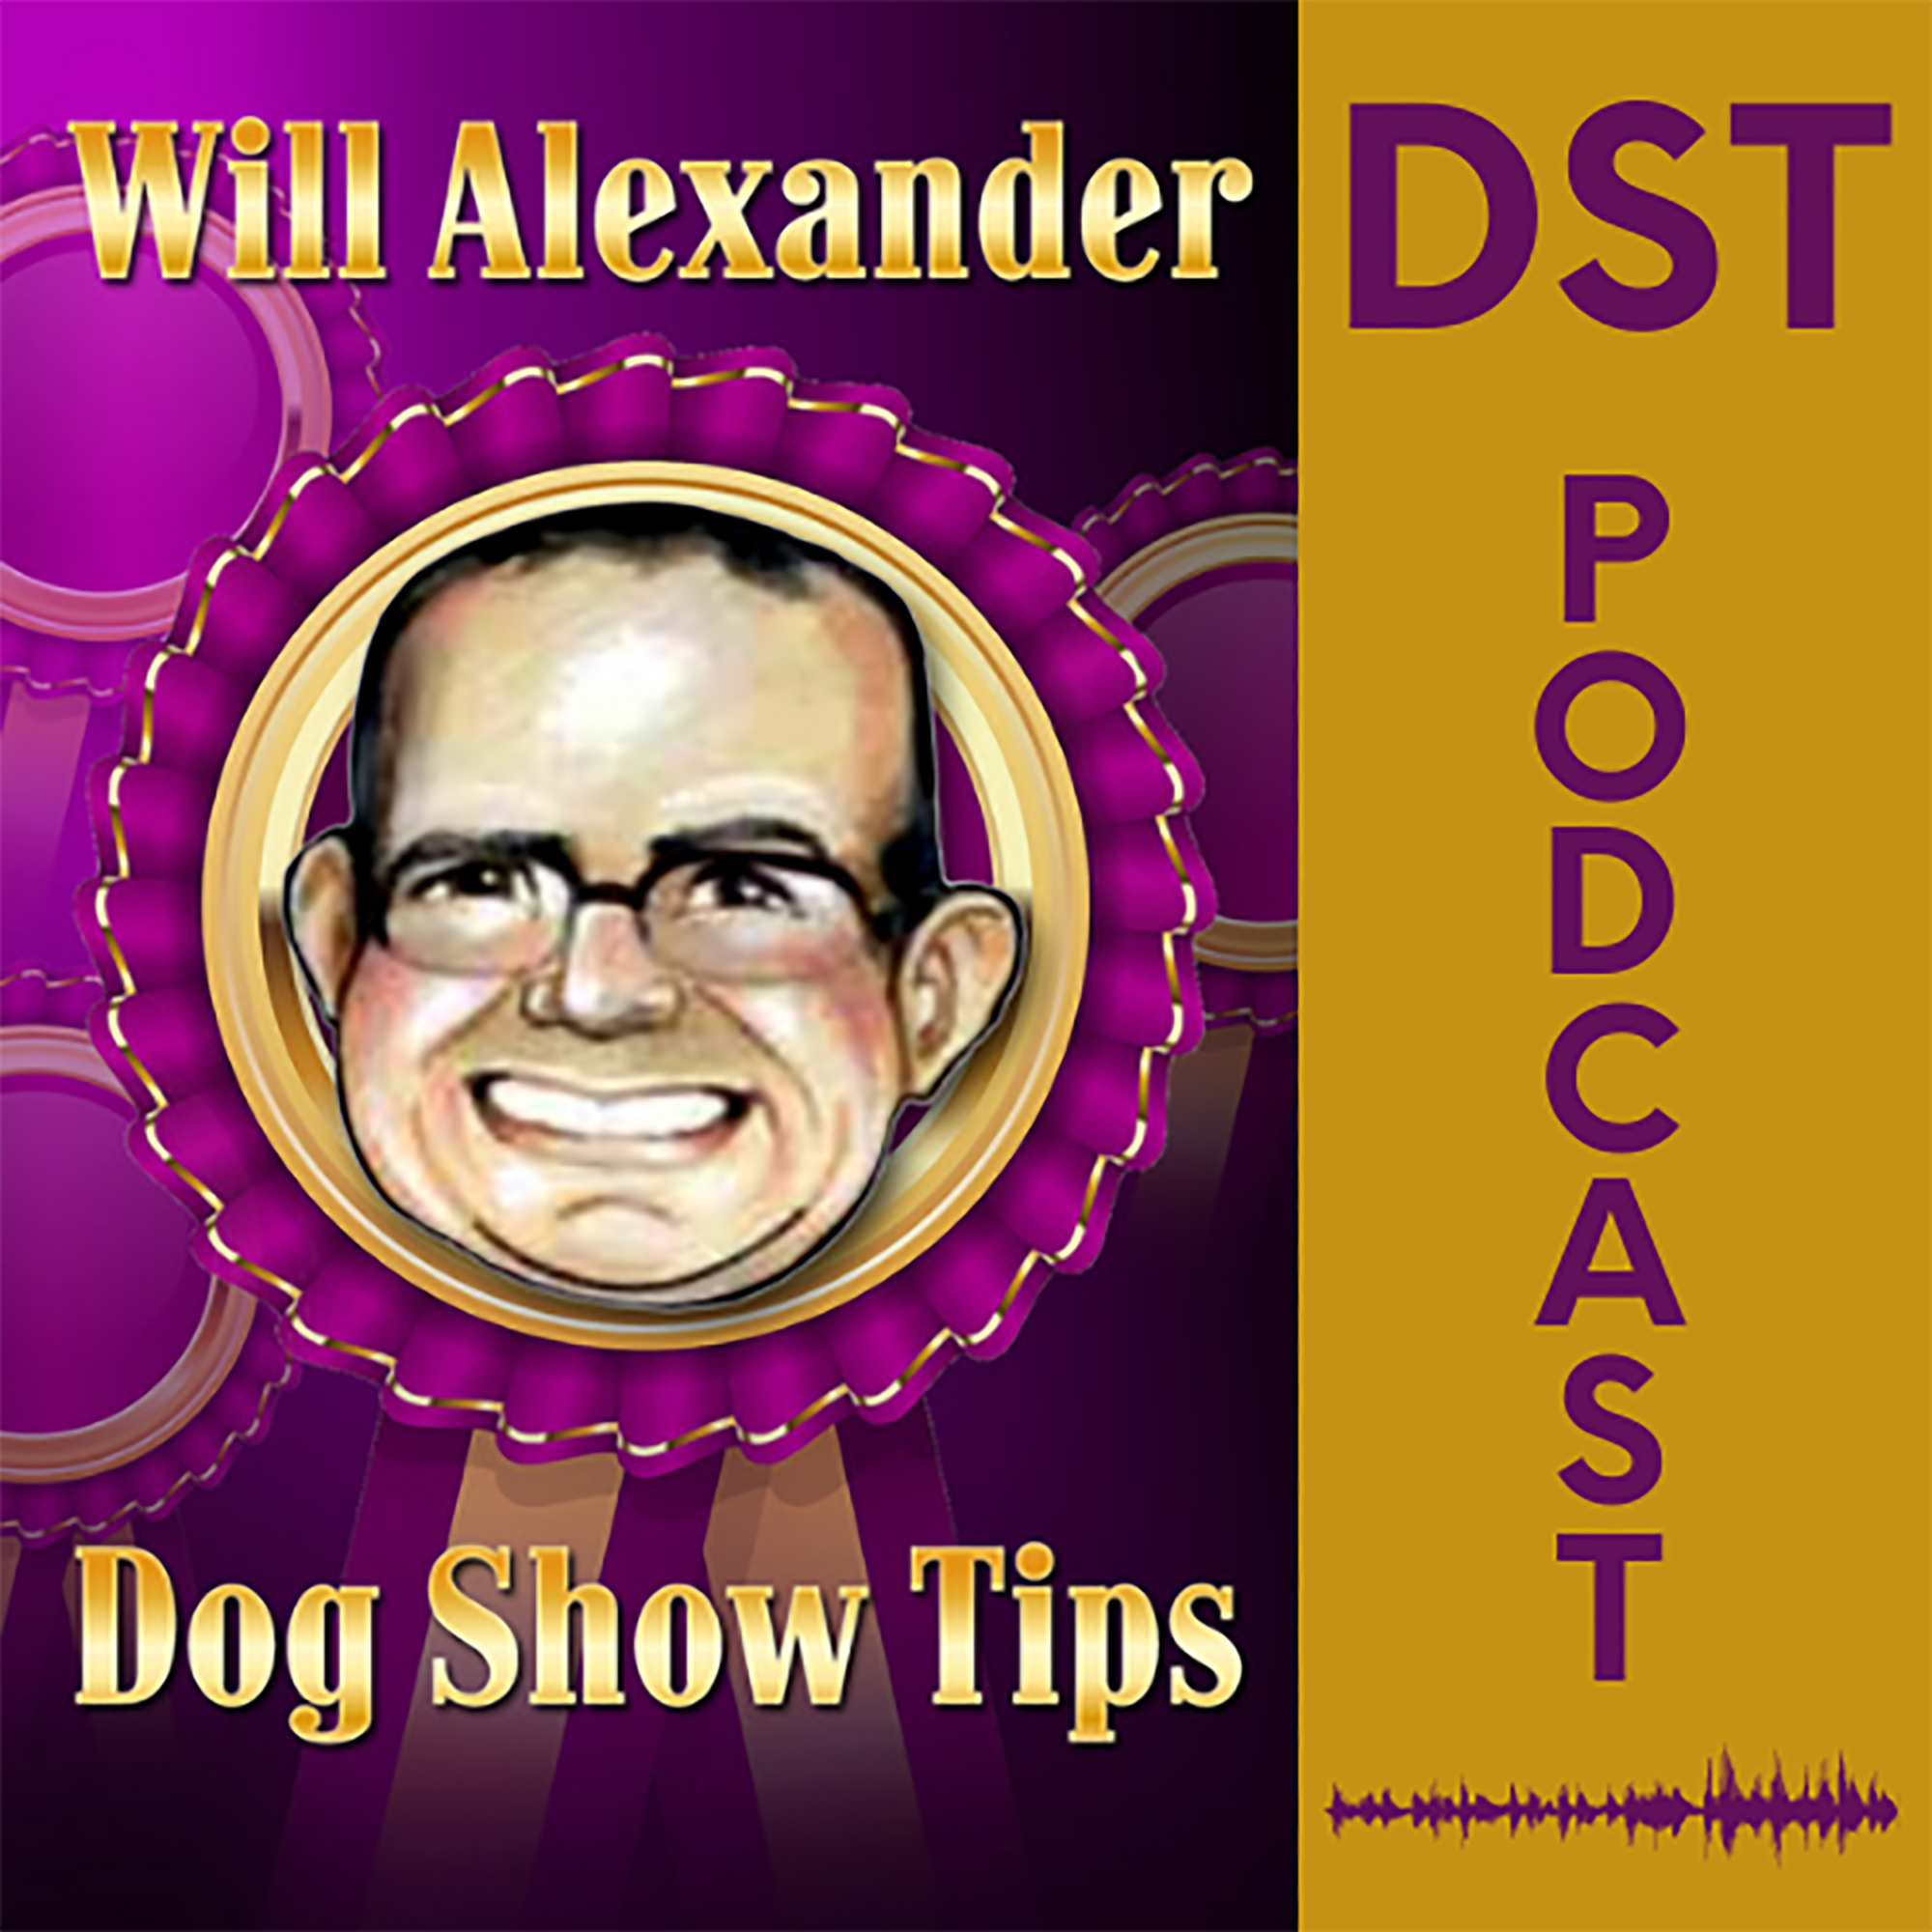 Dog Show Tips - Barbara Heckerman&#39;s interview with Will Alexander